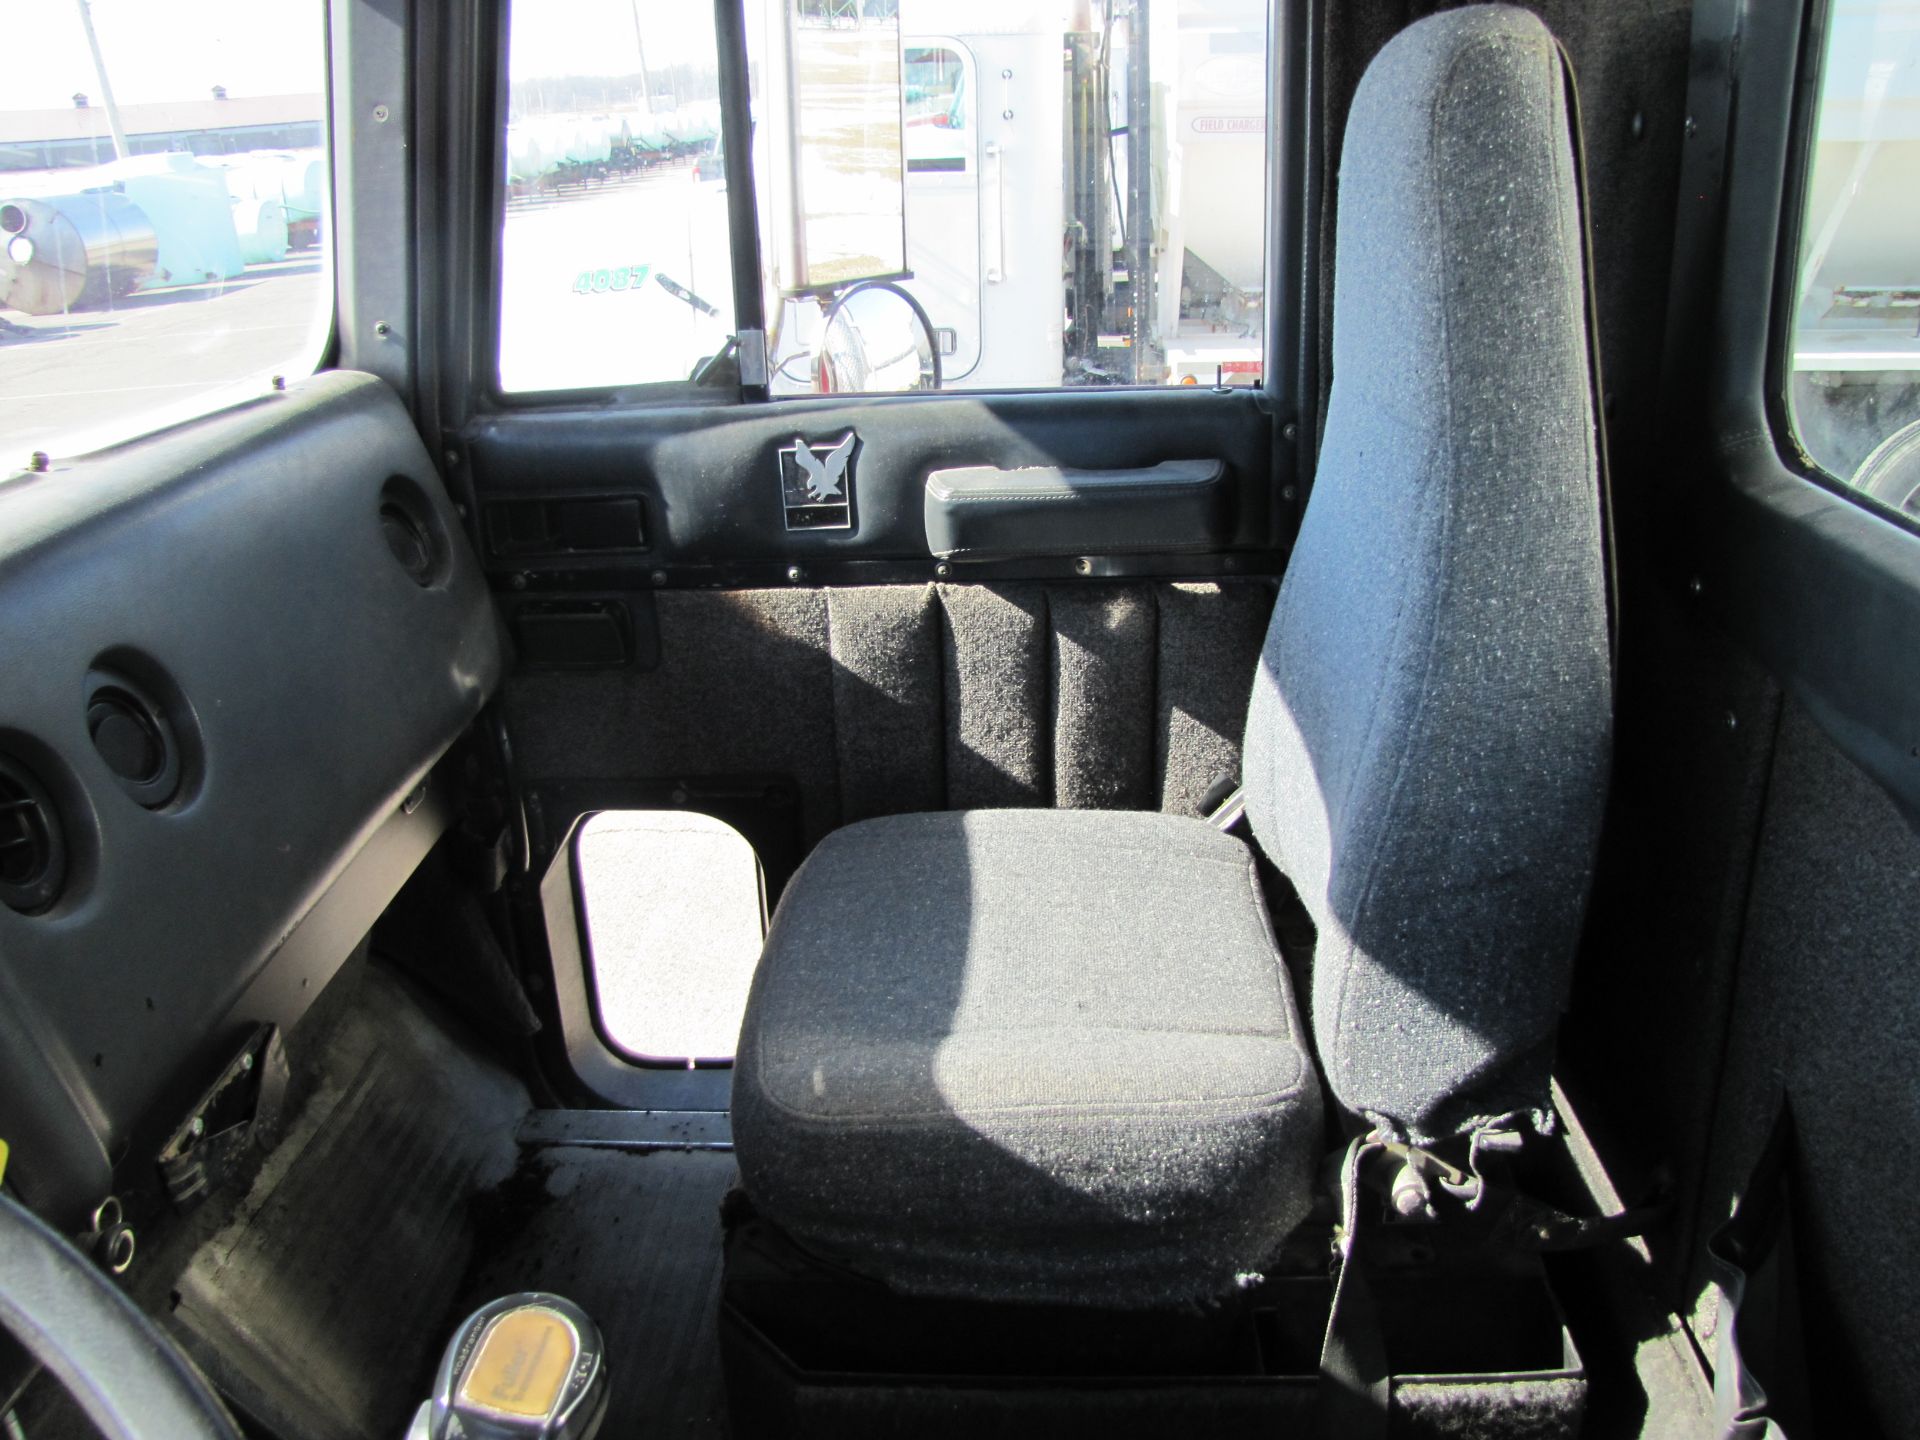 1988 International Eagle 9300, day cab, air ride, wet kit, Cat 3406P, Fuller 13-speed trans - Image 81 of 88